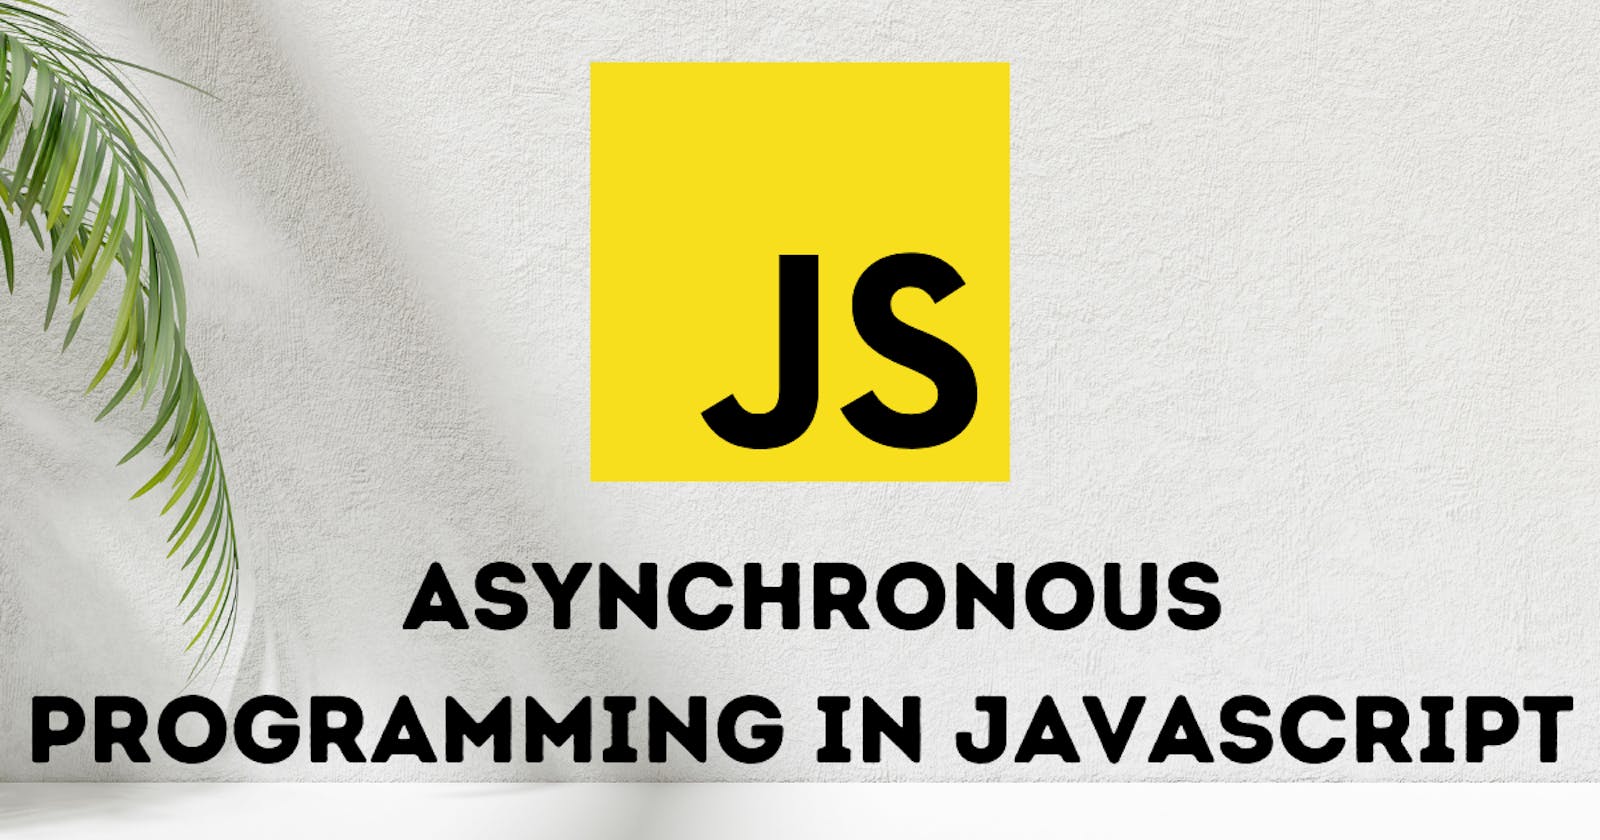 Asynchronous Programming in JavaScript: Learning about promises and async/await.